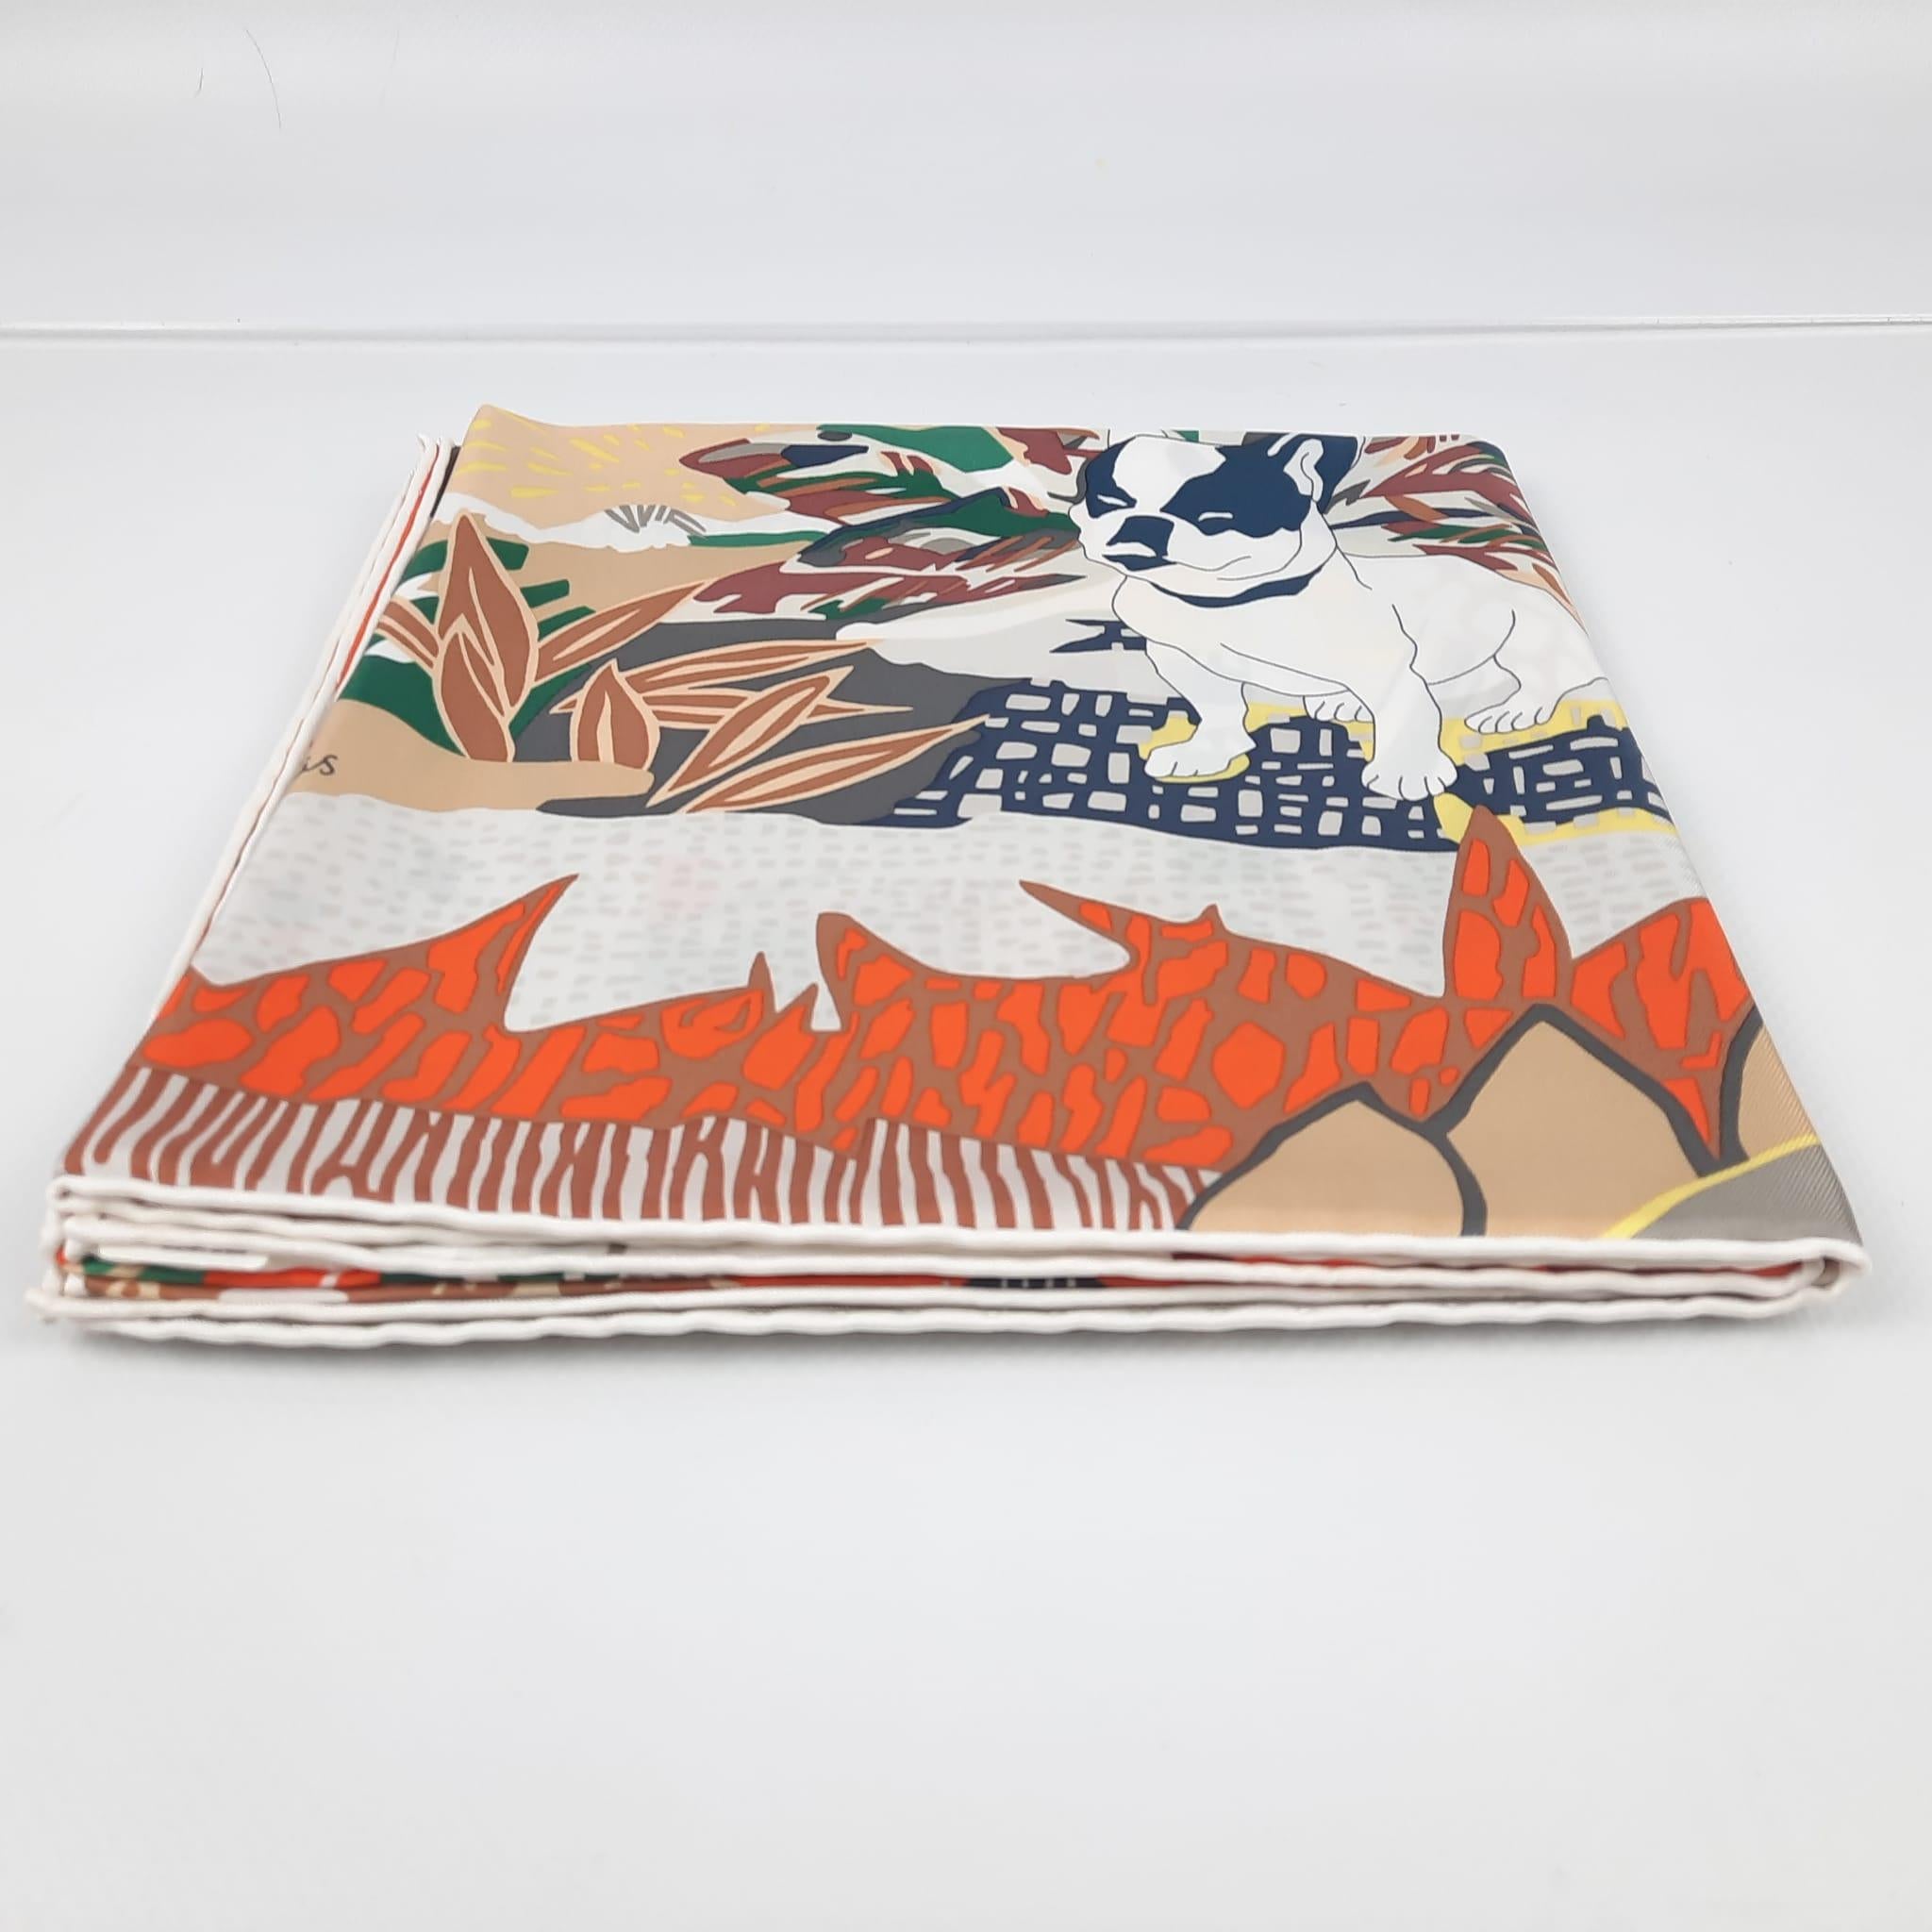 Scarf in silk twill with hand-rolled edges
The Hermès scarf is an infinite source of creativity and storytelling that constantly evolves thanks to the new designs and color combinations offered each season.
Made in France
Designed by Carine